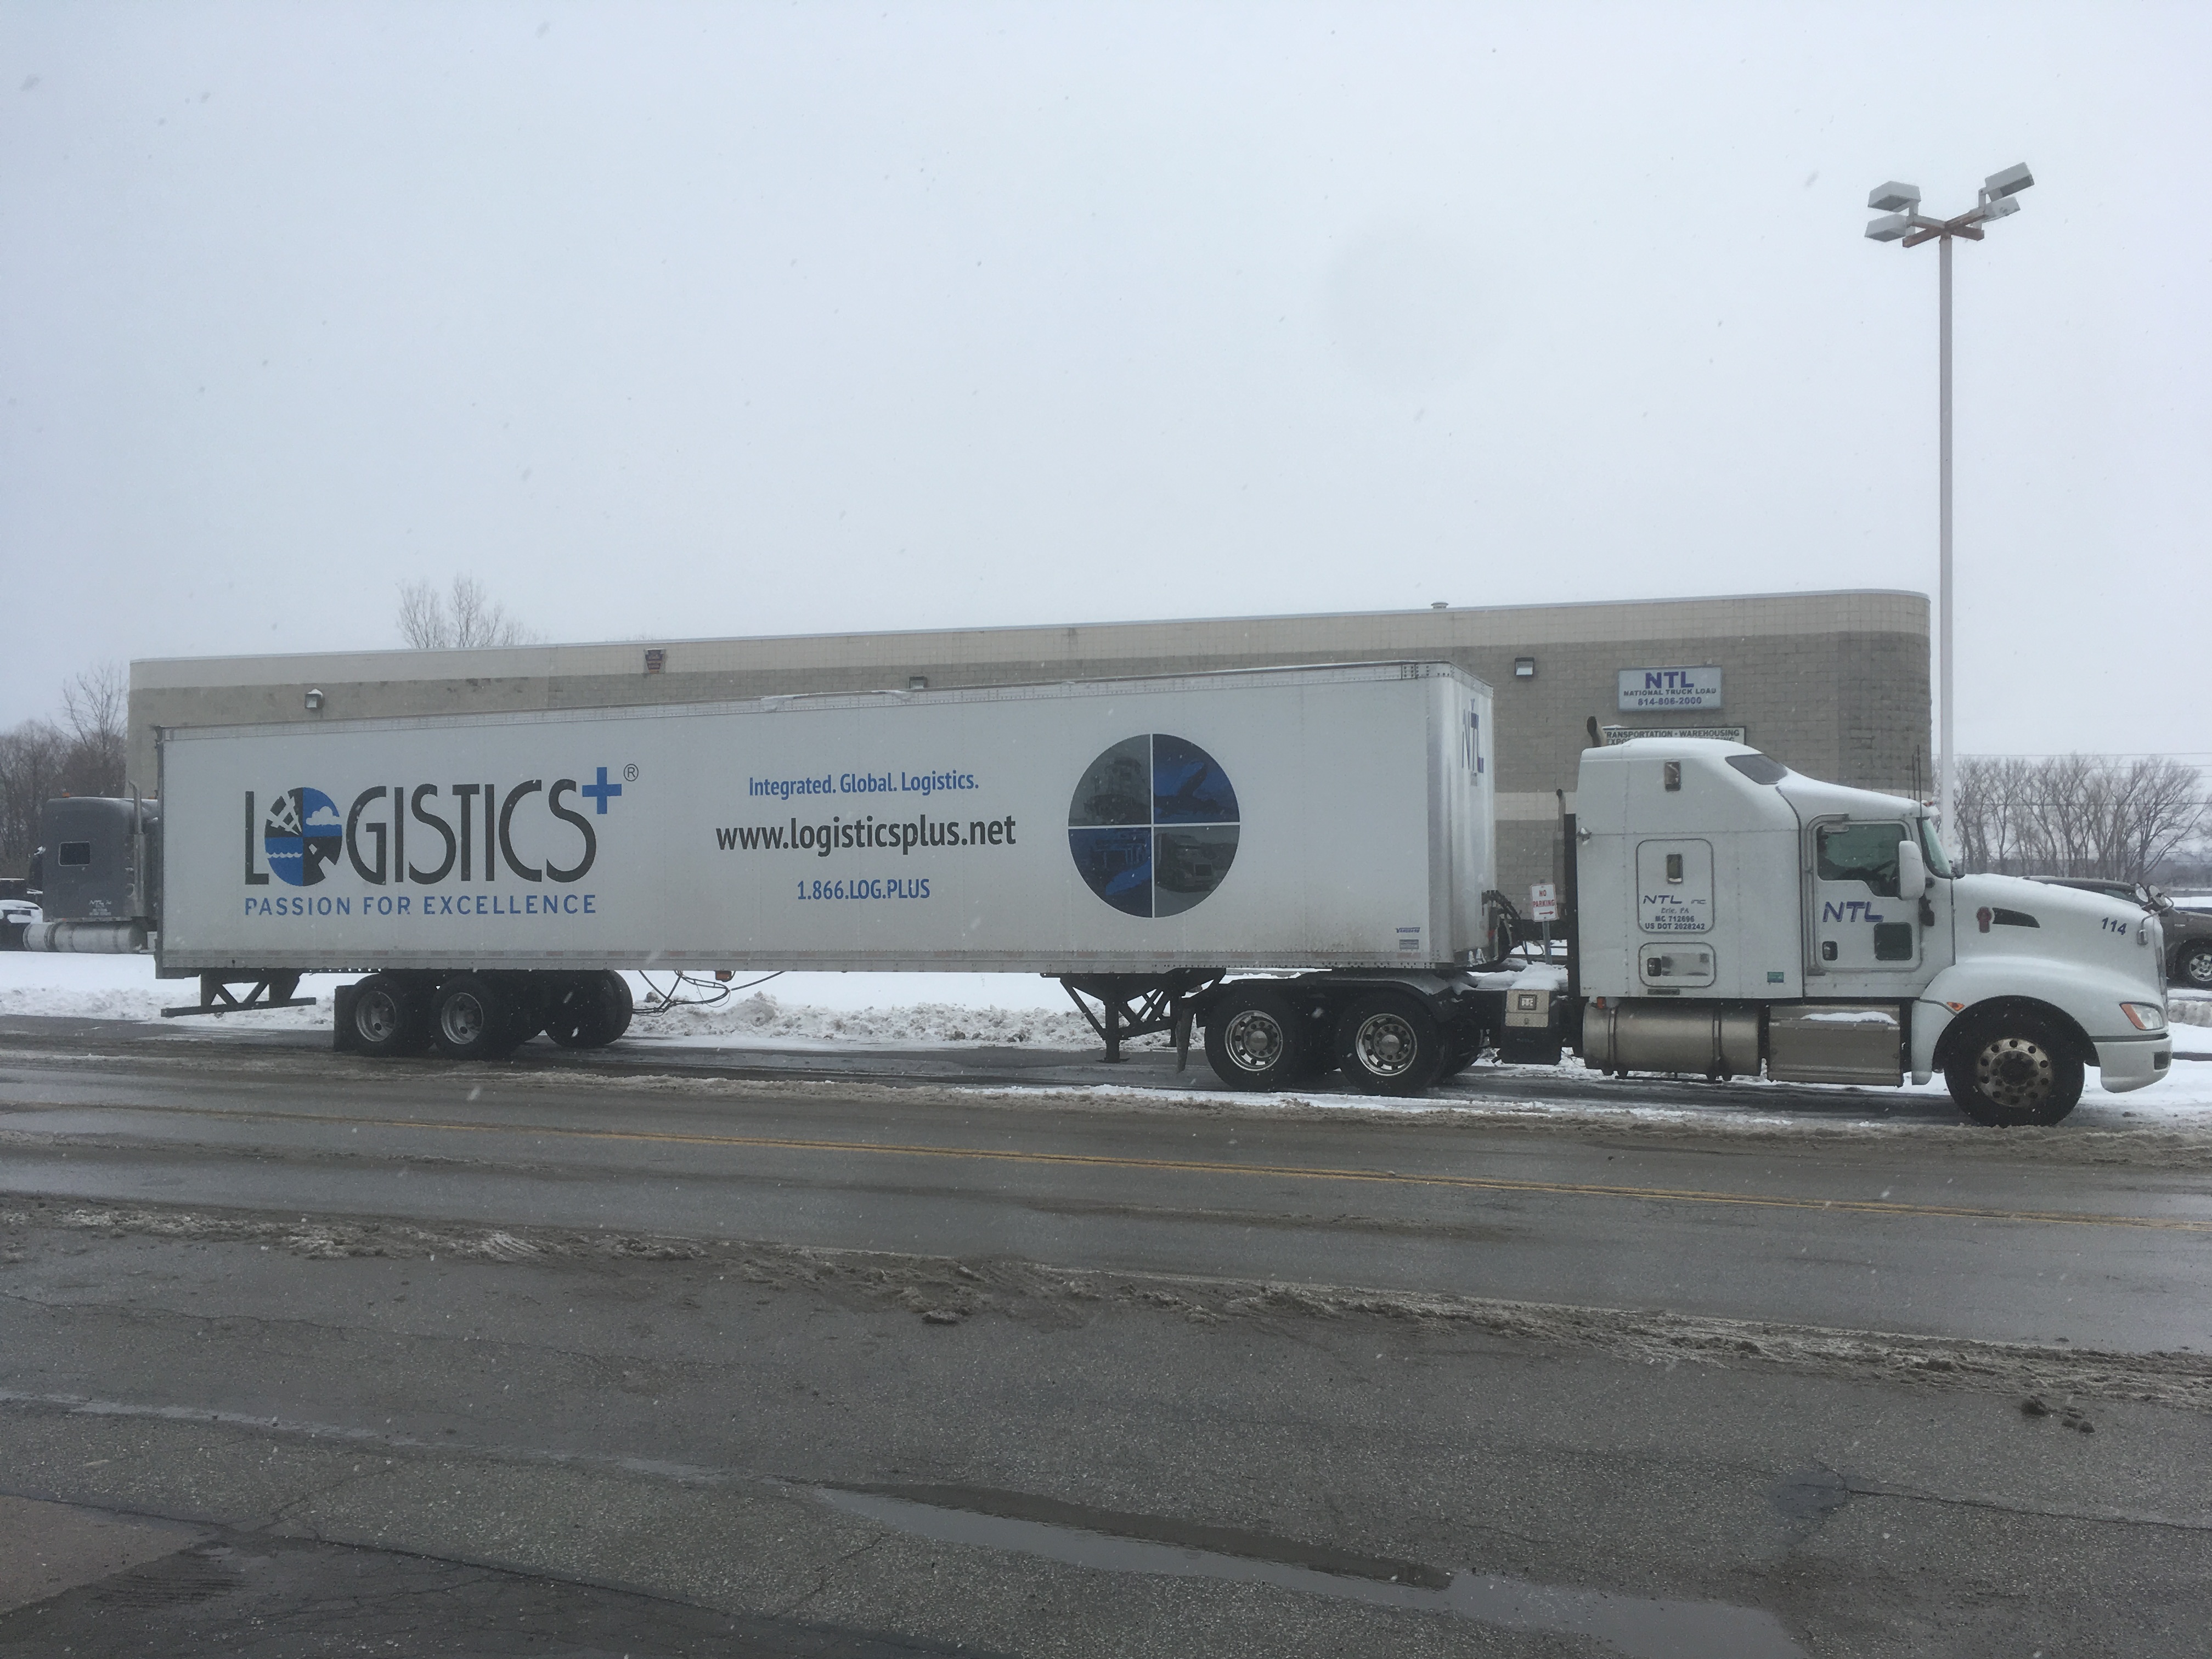 New Logistics Plus Branded Trailer on Display in Erie